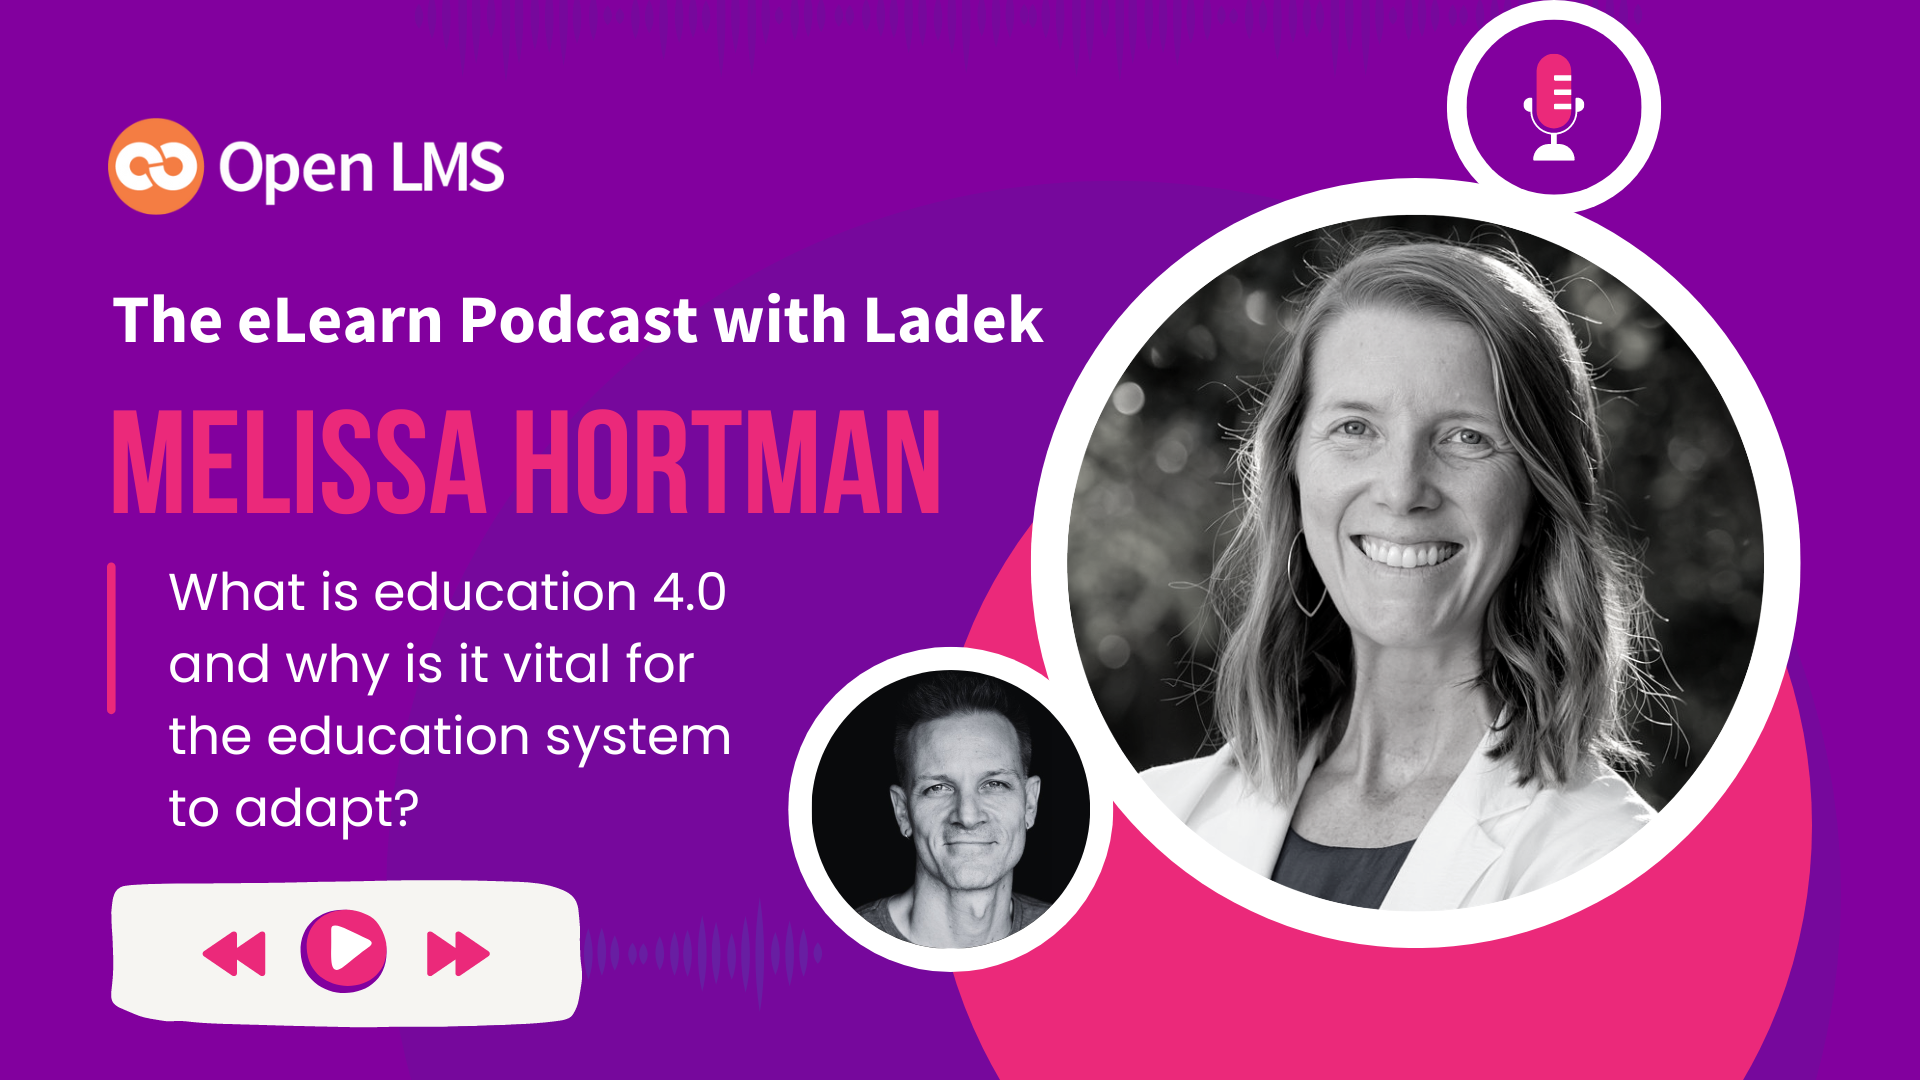 Education 4.0 — Why Is It Vital For Higher Ed Today? With Melissa Hortman